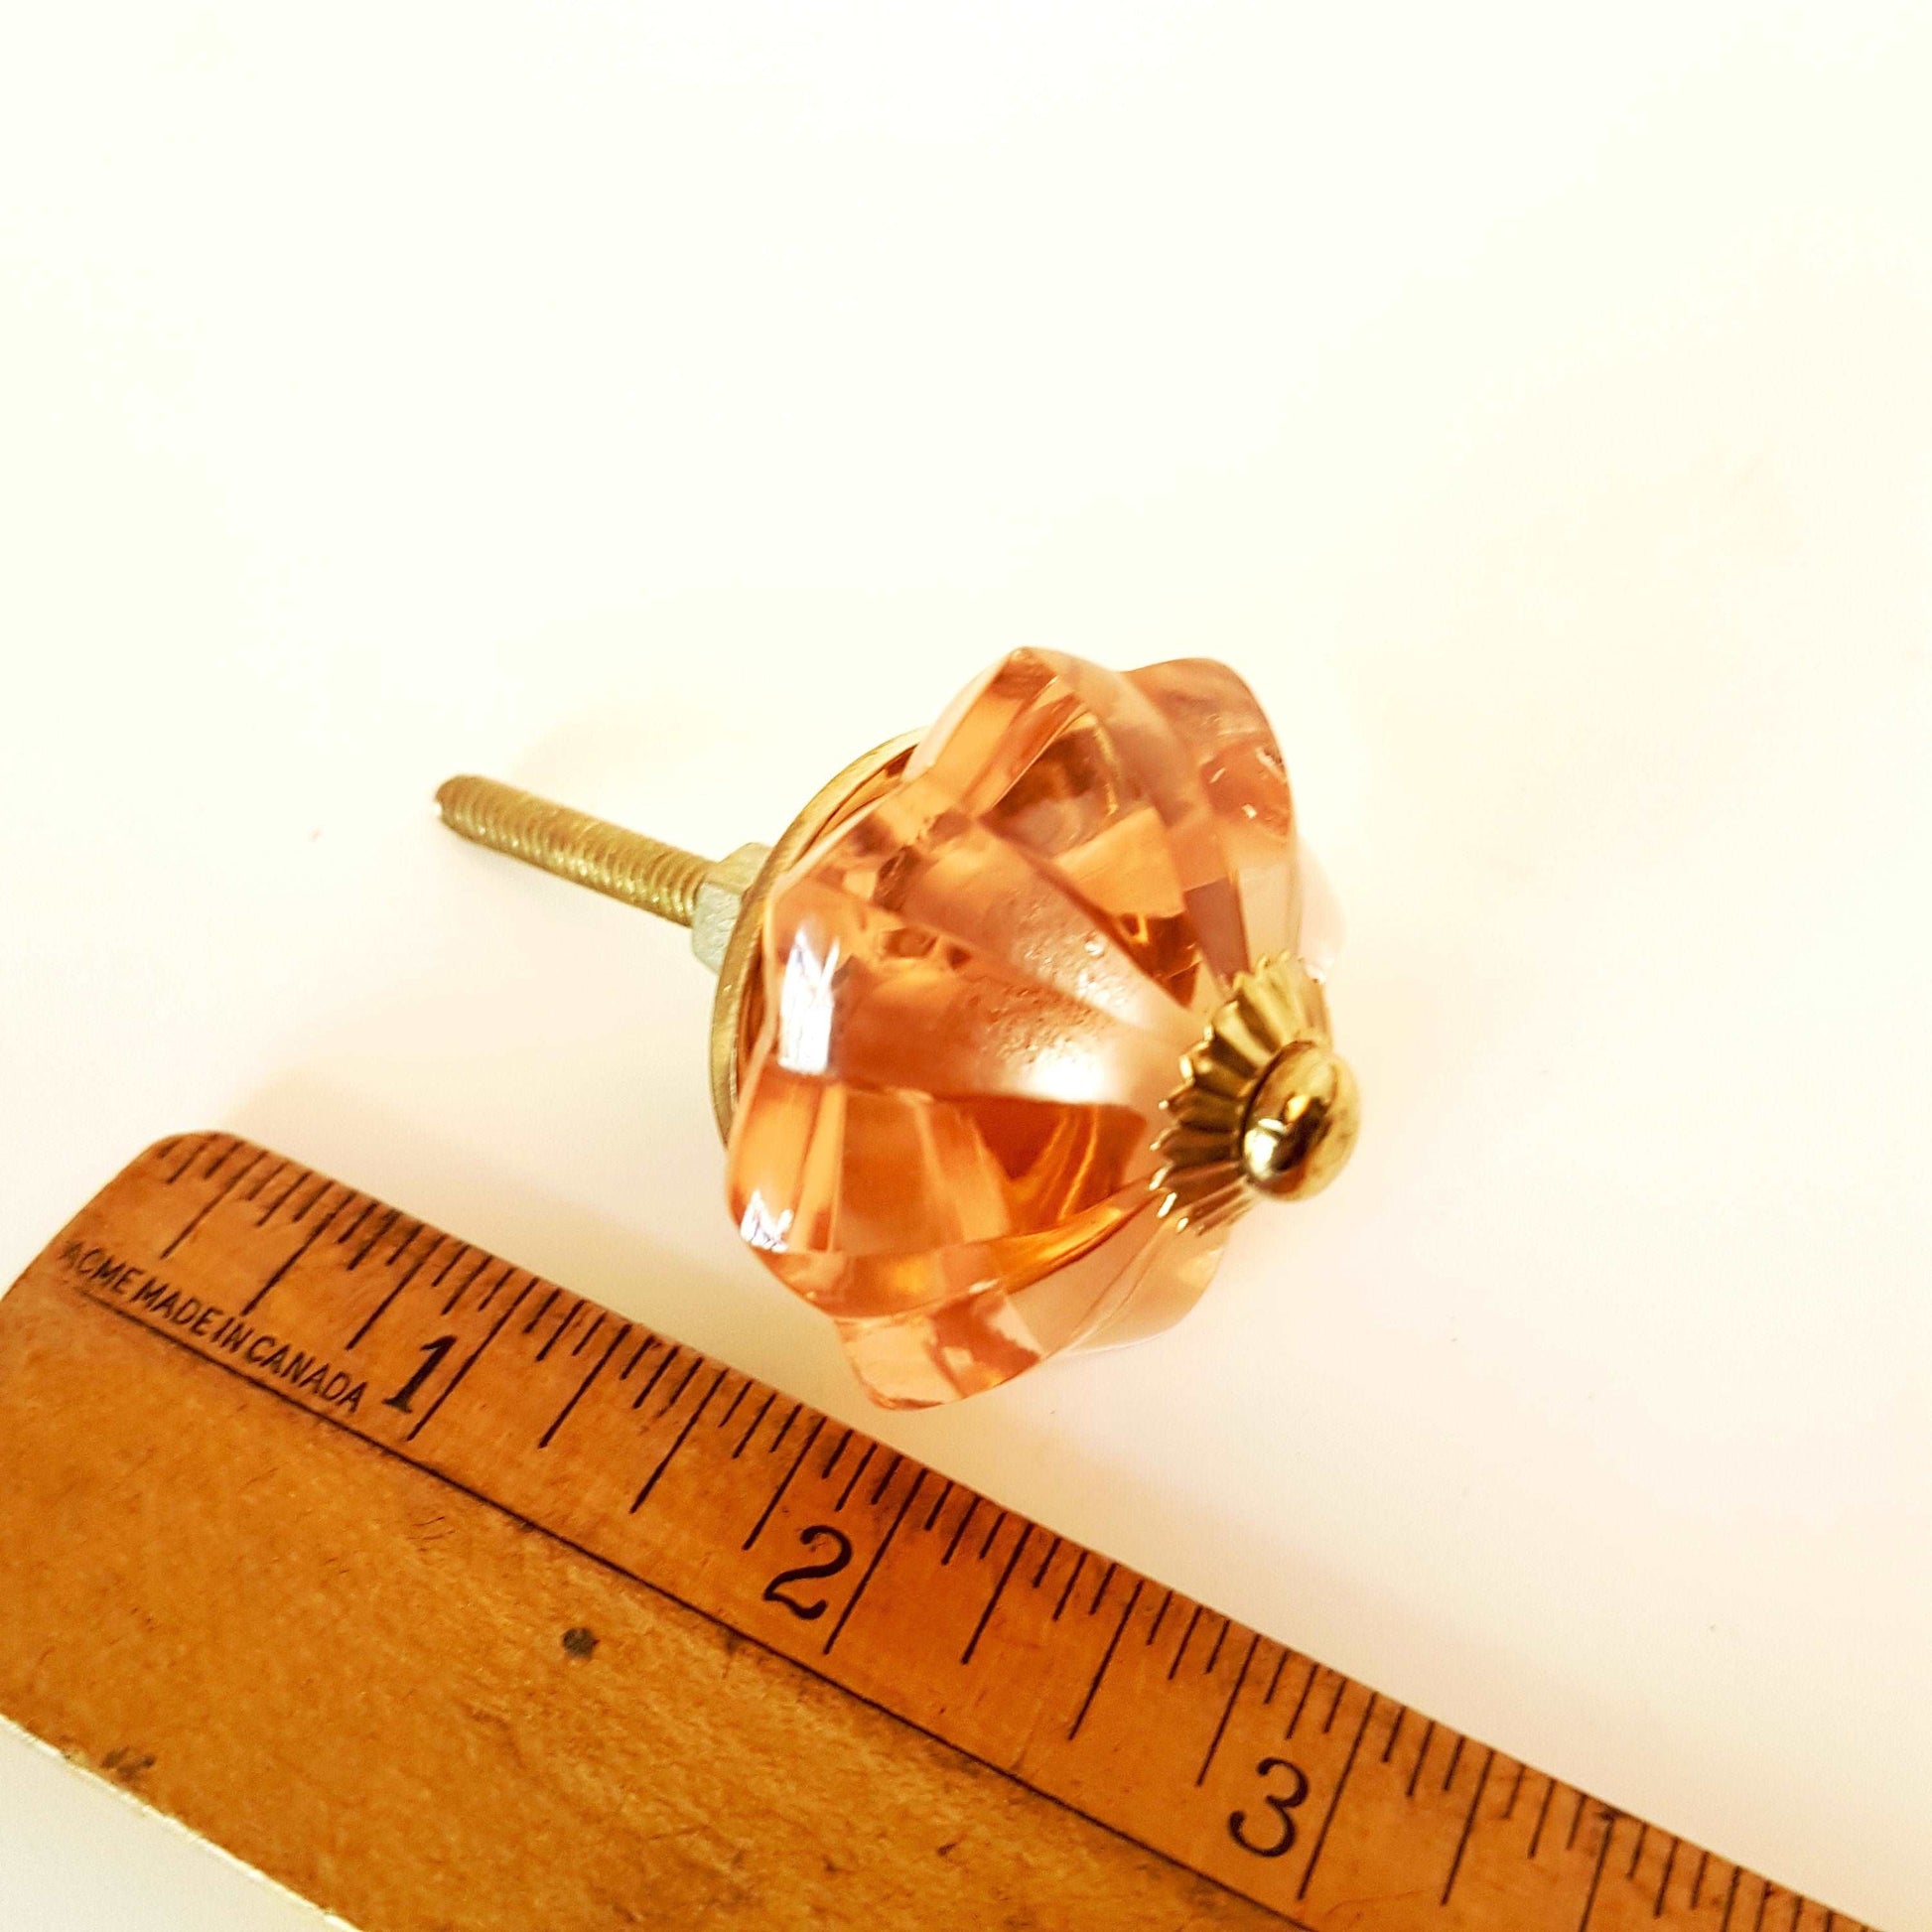 8 rose gold crystal cabinet knobs with brass centers. Transparent pink cut glass drawer pulls. For kitchen cupboards, dressers, vanities. - Vintage India Ca